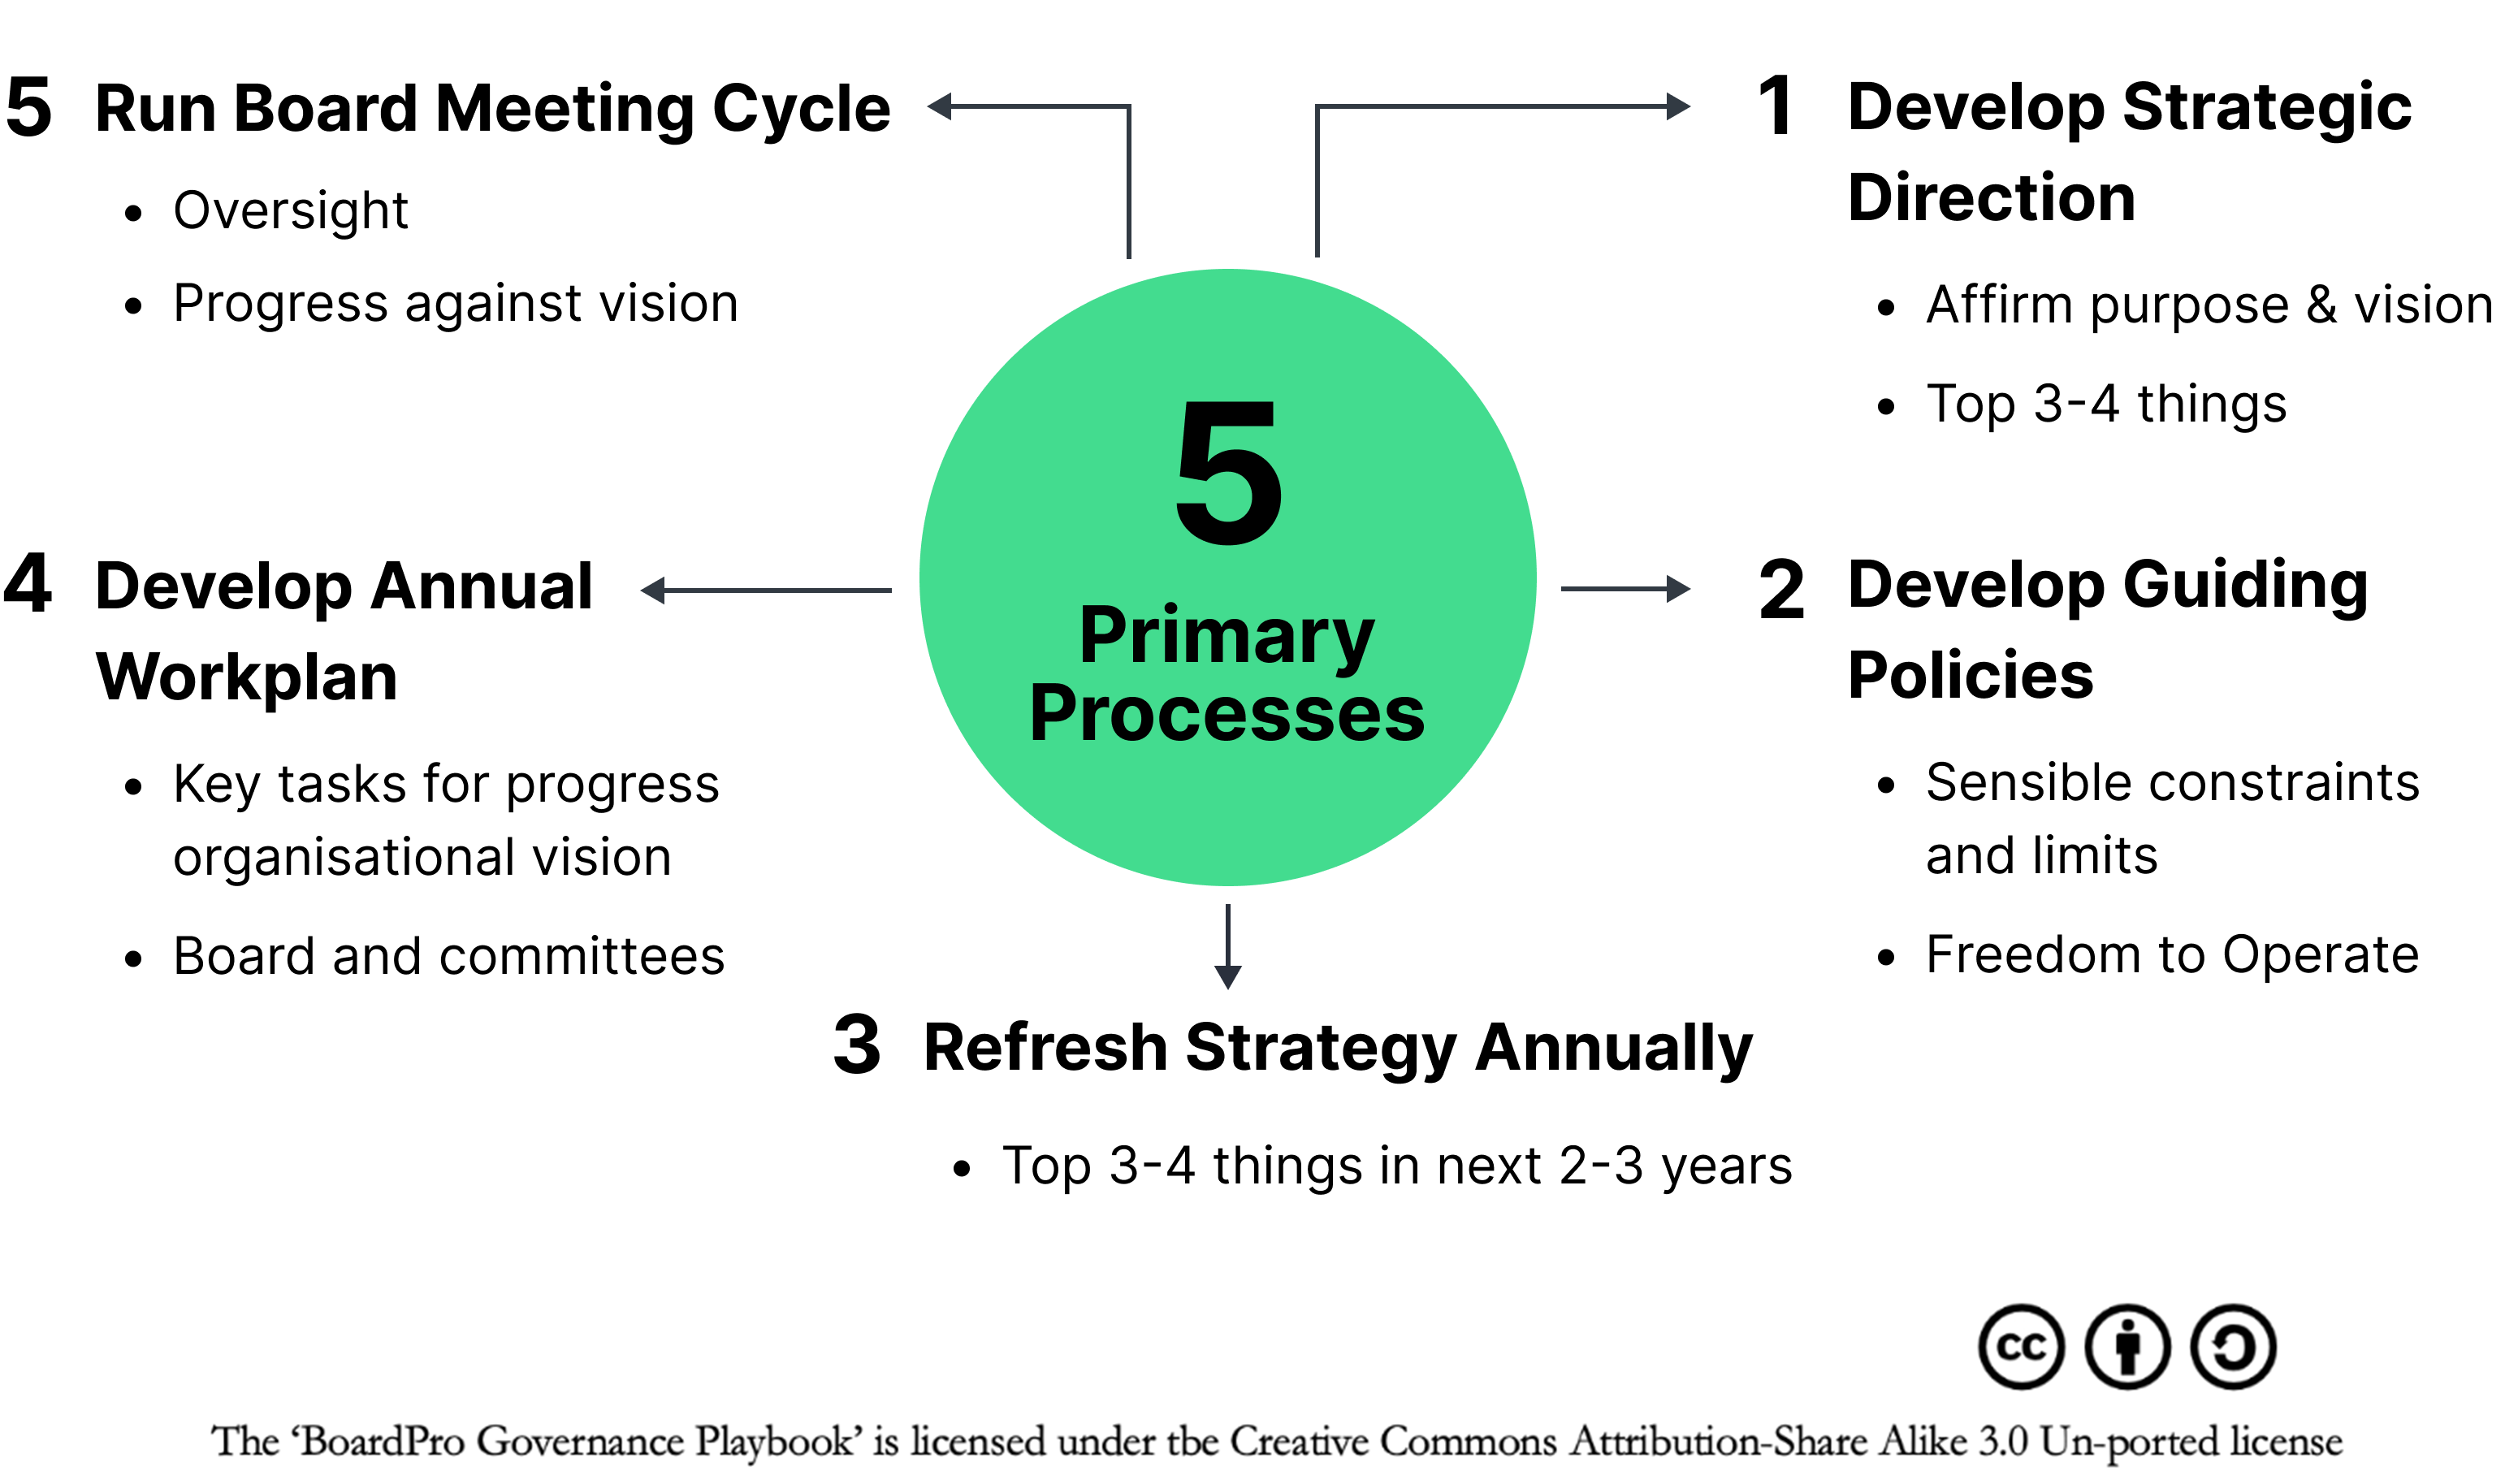 Governance playbook 5 primary processes